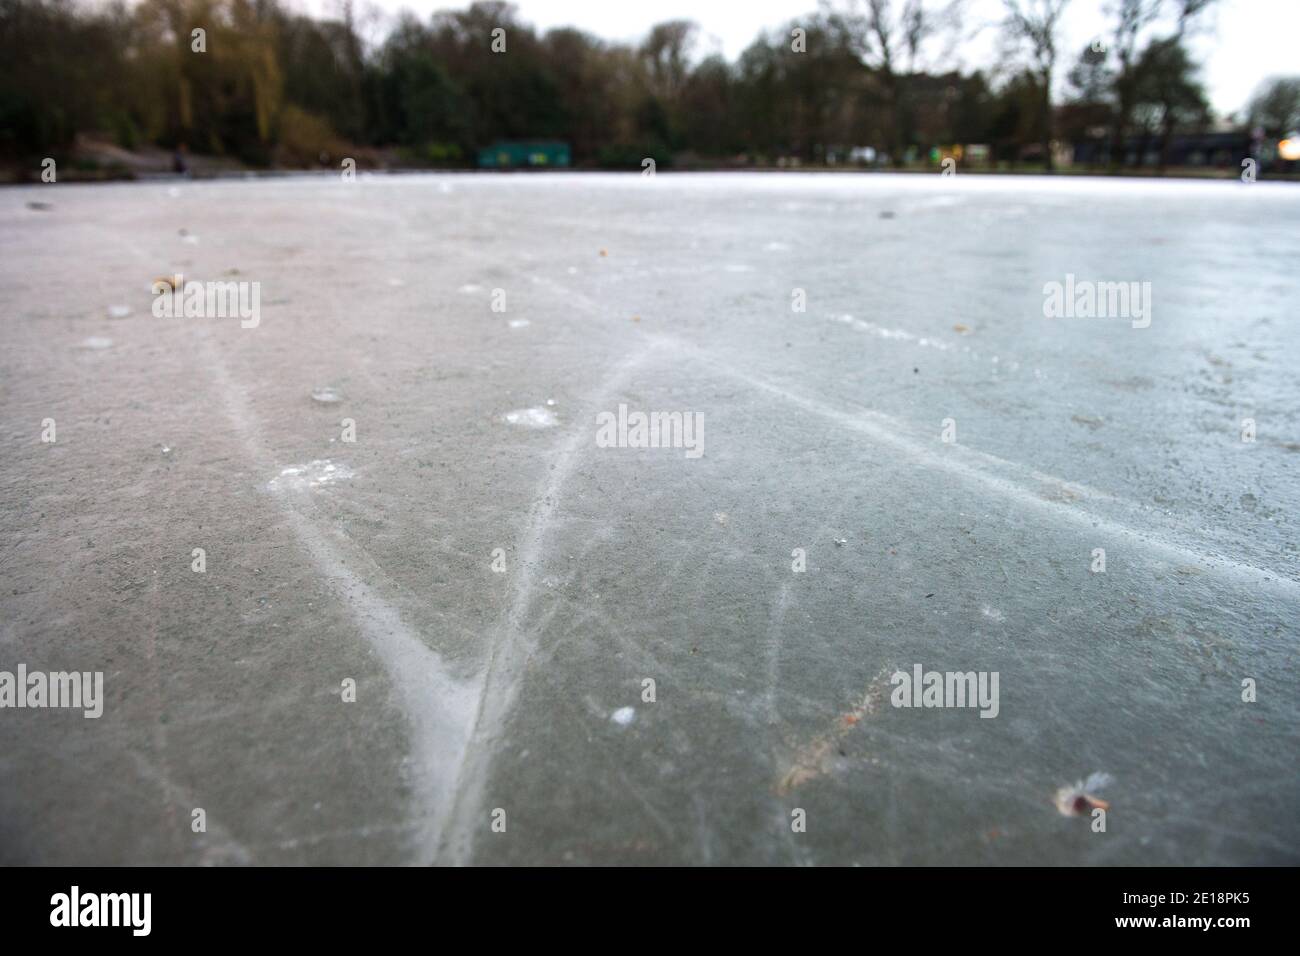 Glasgow, Scotland, UK. 5 January 2021. Pictured: The melting and cracking ice on the pond. Queens Park in Shawlands, this morning showing only a few people around the park and on the ice, form a marked contrast to the scenes yesterday which saw hundreds of people on the ice, skating, playing hockey and around the park. As of 00:01 this morning Scotland has been placed into another lockdown as per the Scottish First Minister's address at 2pm yesterday. Credit: Colin Fisher/Alamy Live News. Stock Photo